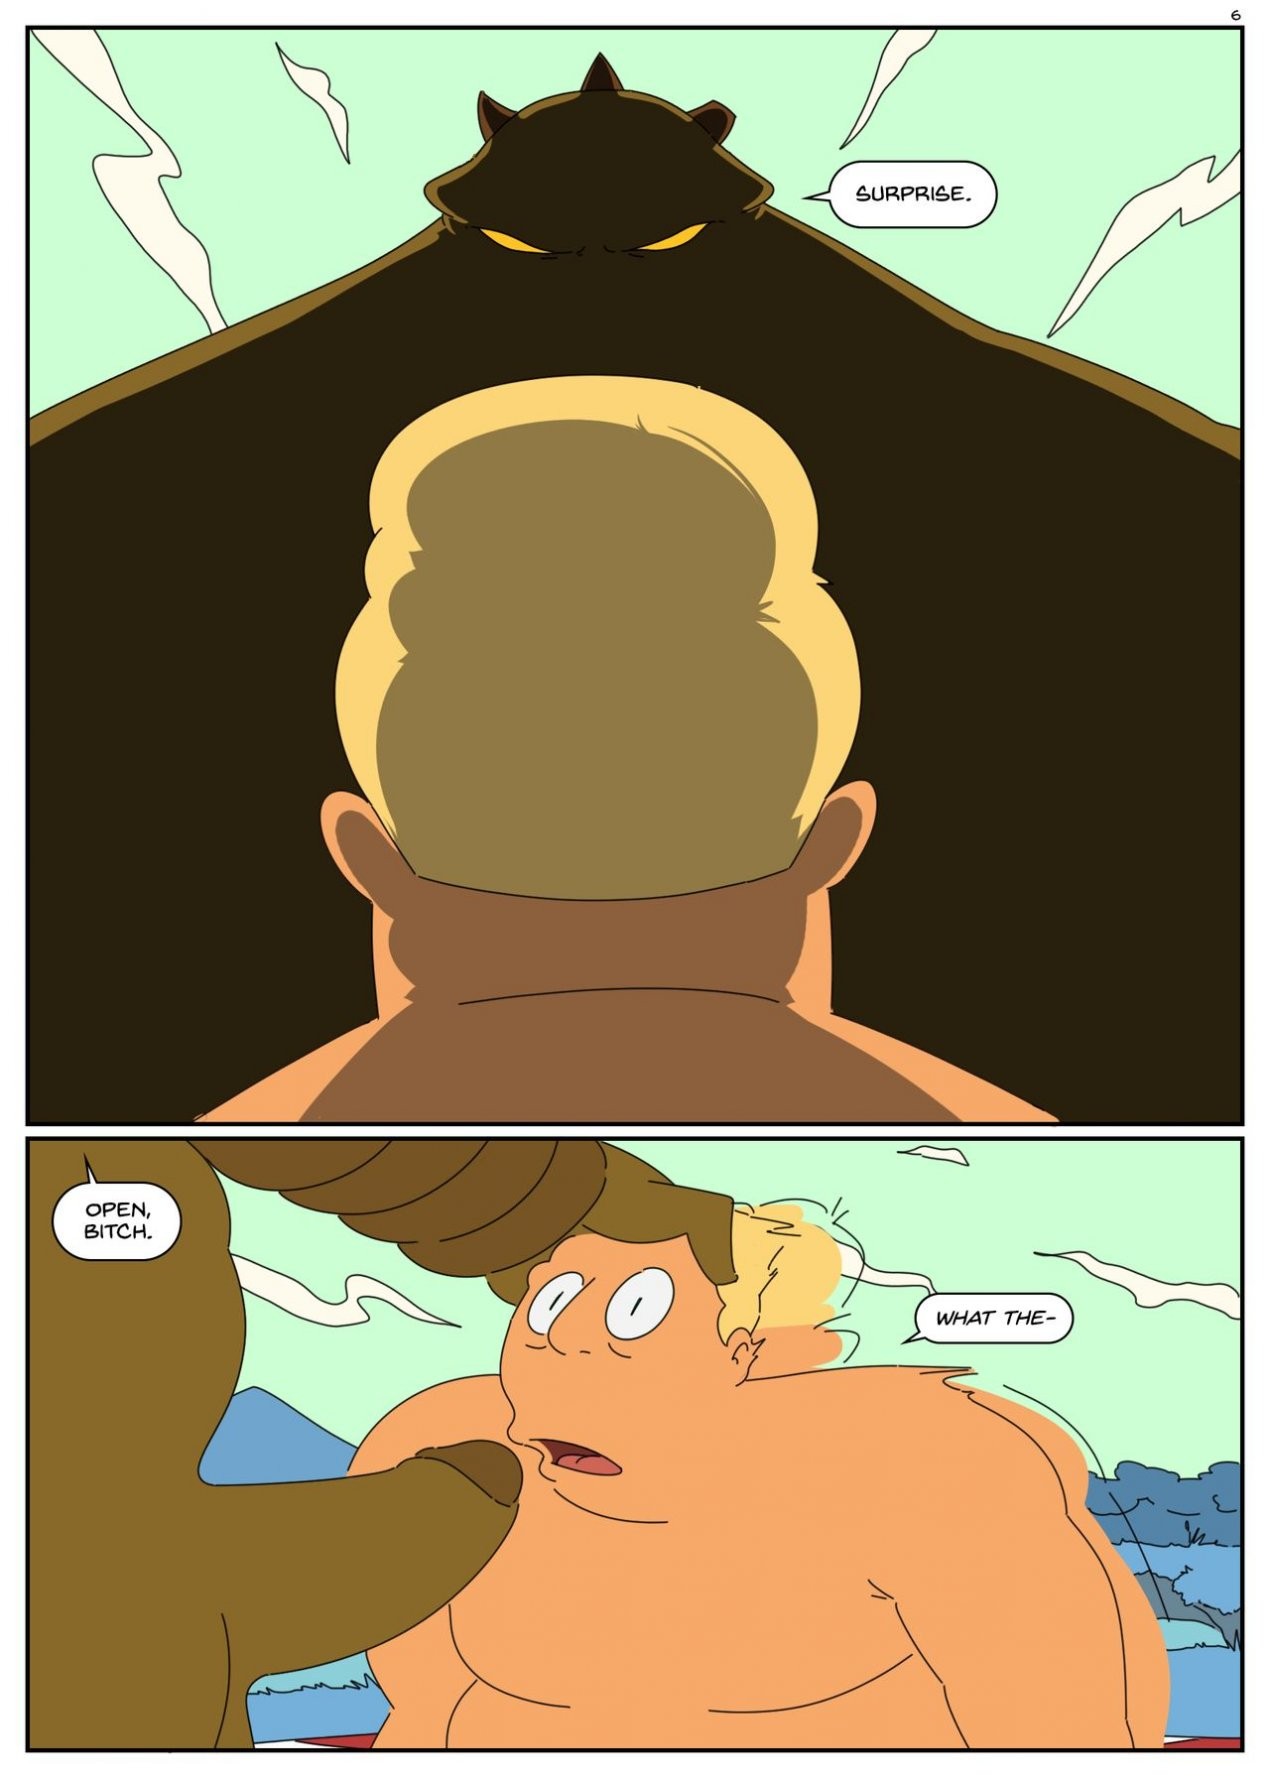 ZAPP BRANNIGAN & THE MISTERIOUS OMICRONIAN porn comic picture 7